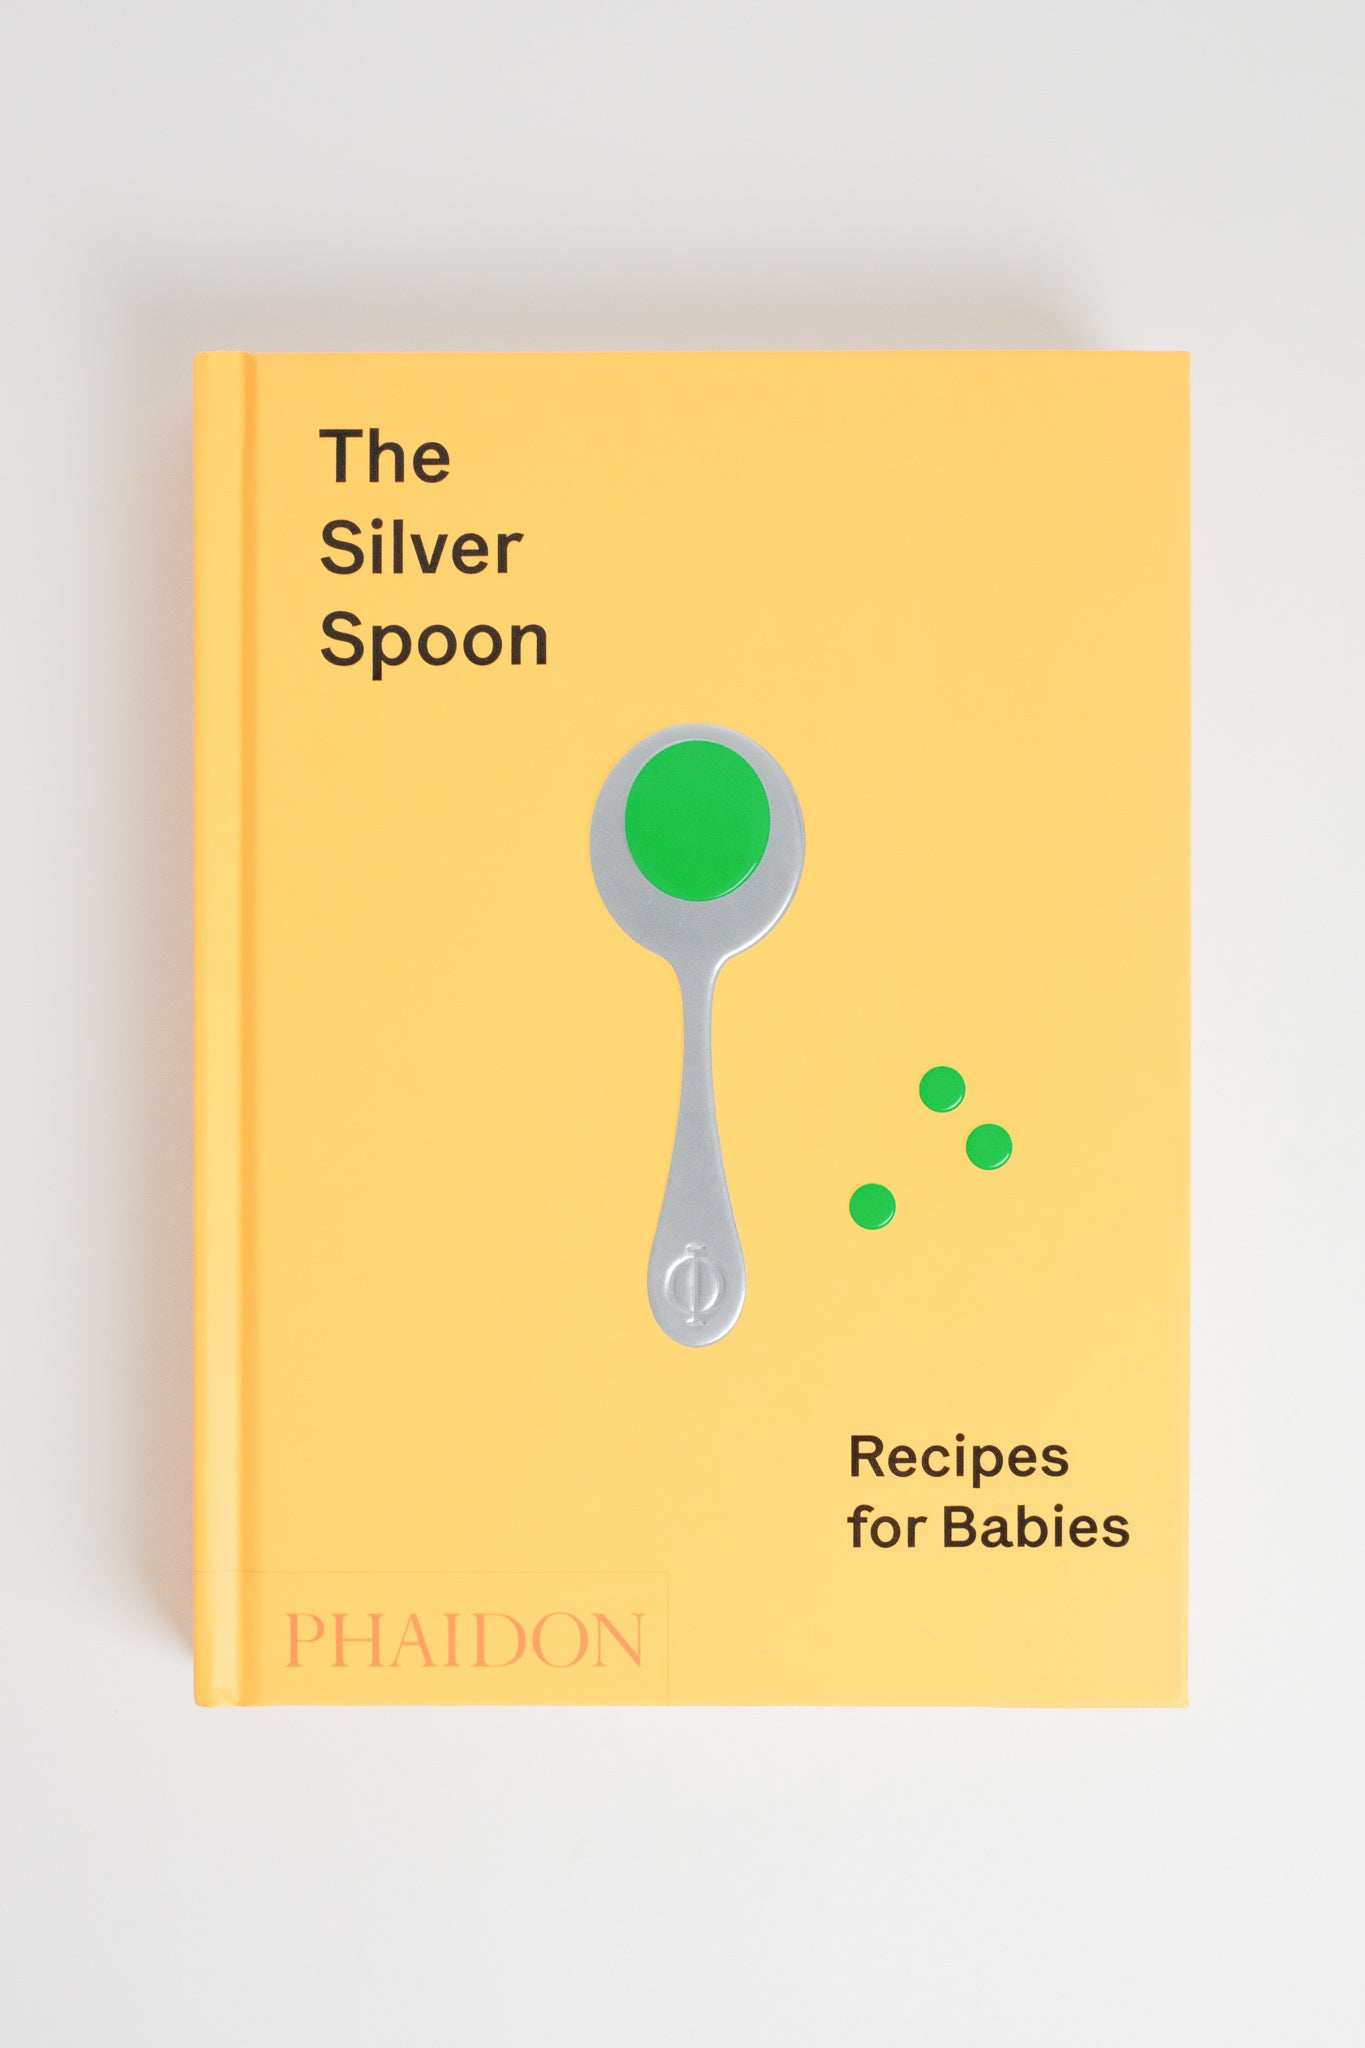 The Silver Spoon: Recipes for Babies